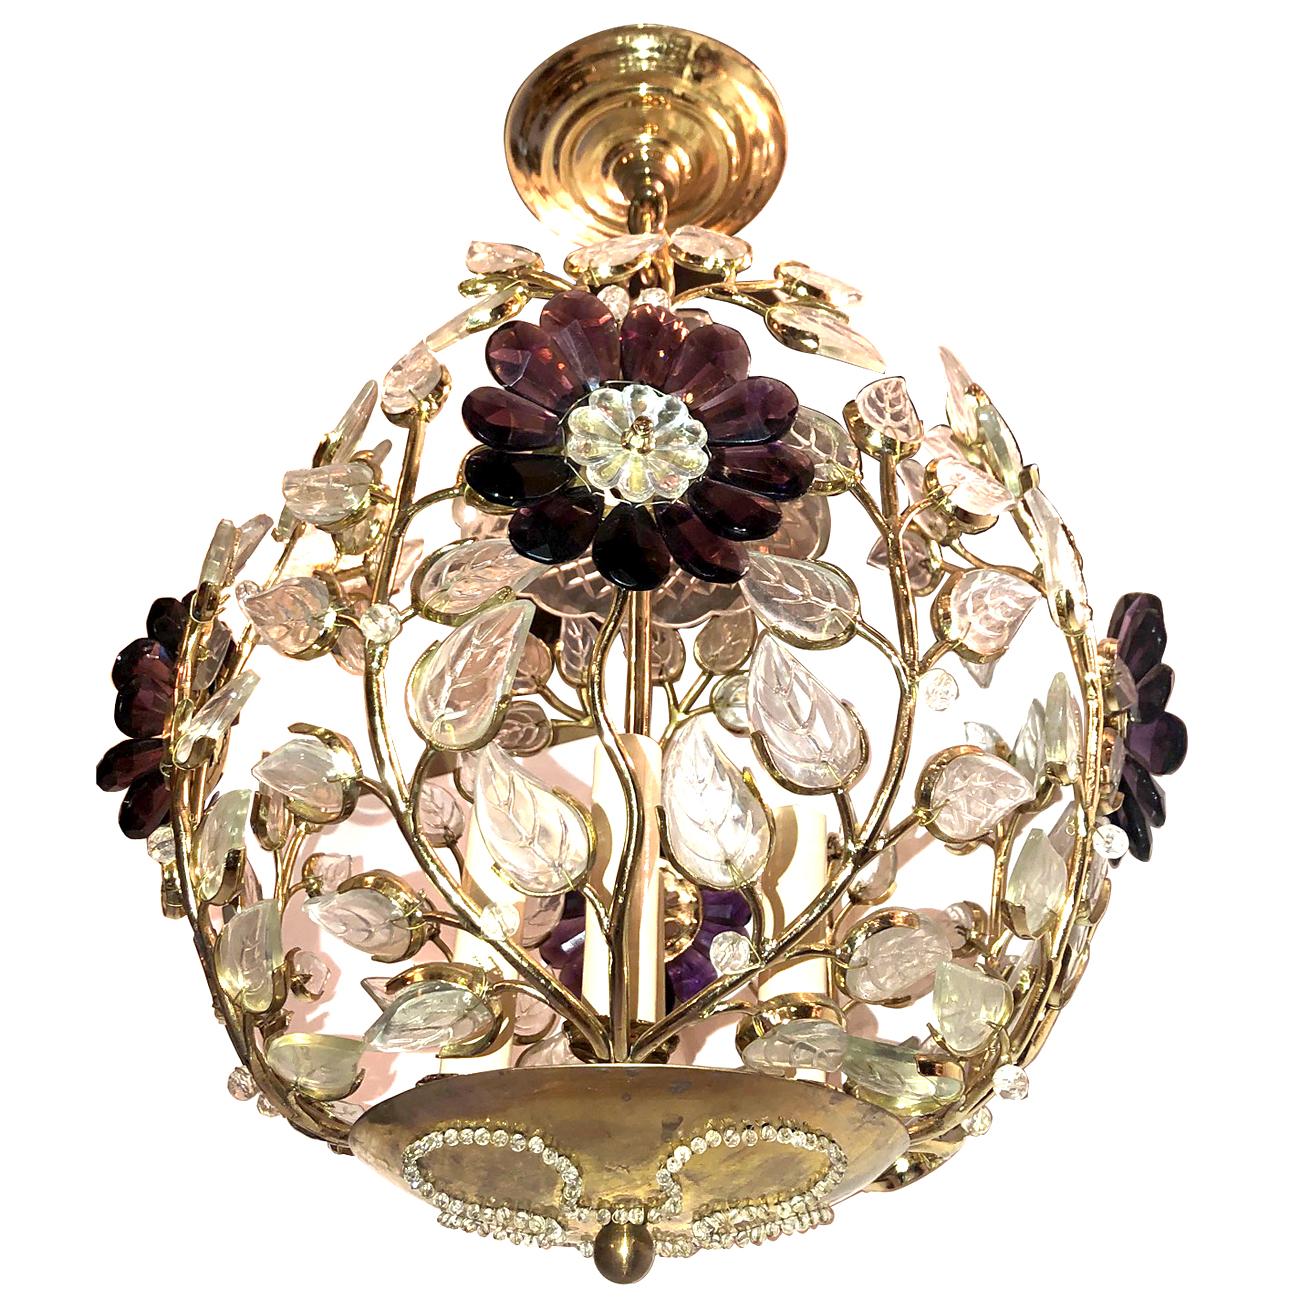 Set of 4 Gilt Lanterns with Glass Leaves and Amethyst Flowers. Sold Individually For Sale